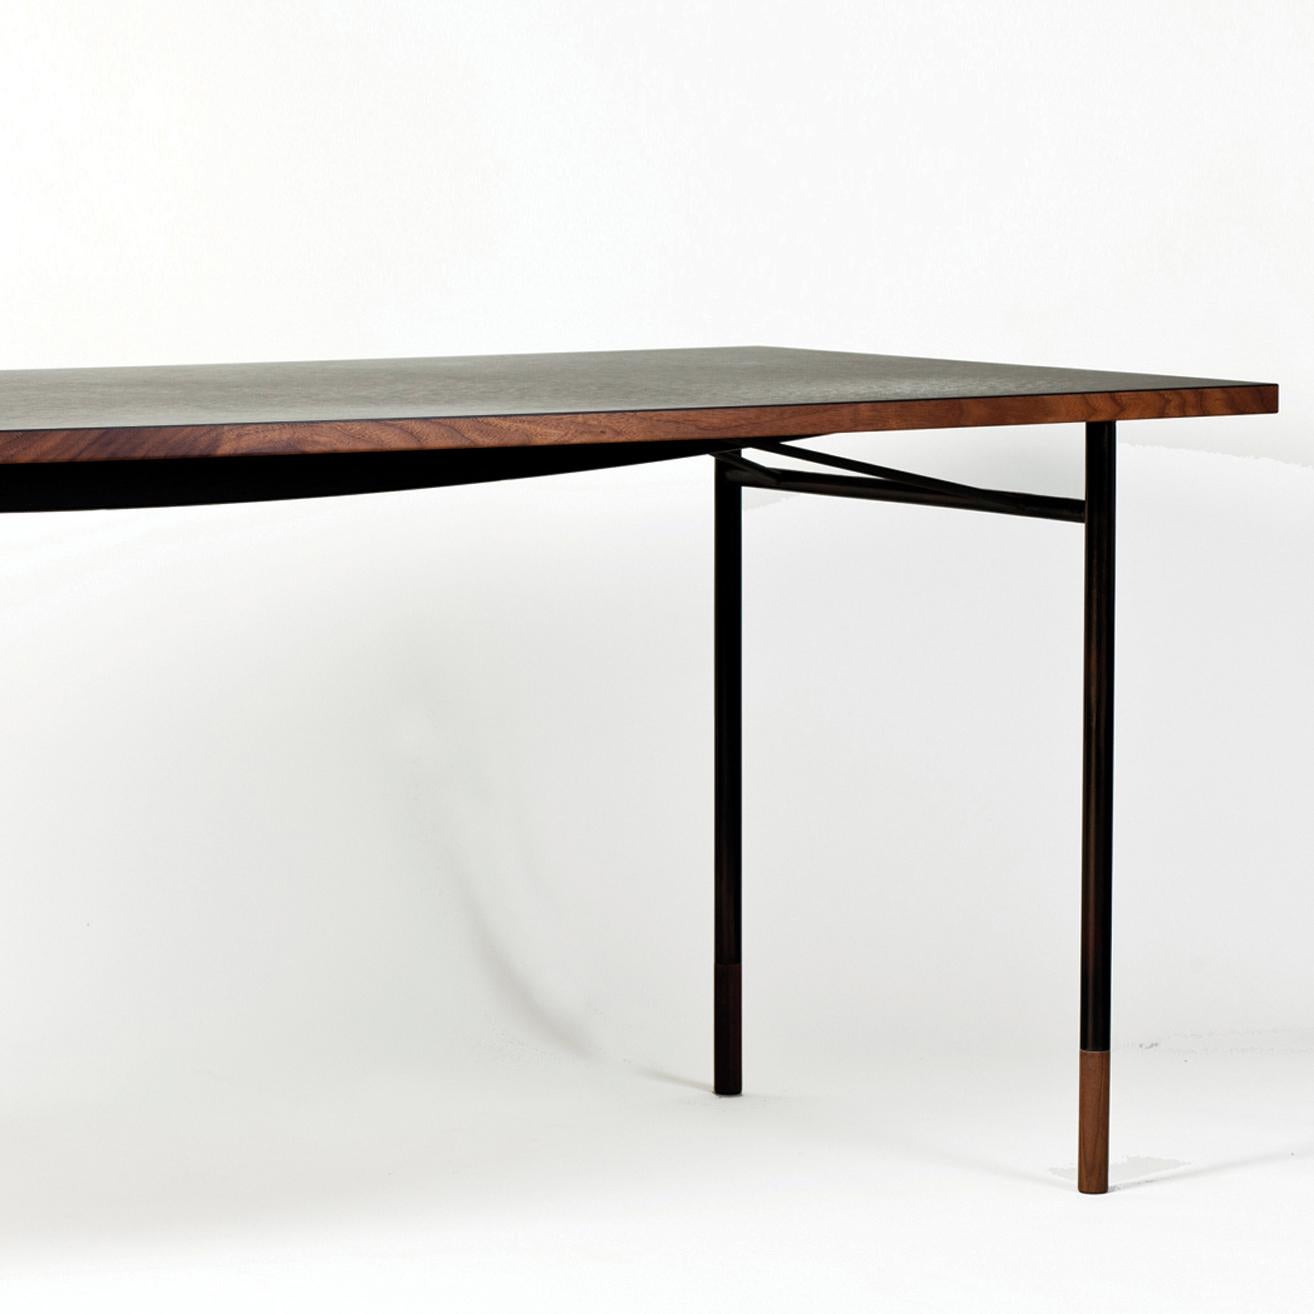 Table desk designed by Finn Juhl in 1945, relaunched in 2009. The tray unit that is included was designed in 1953, relaunched in 2012. Manufactured by House of Finn Juhl in Denmark.

During his career, Finn Juhl designed a series of different